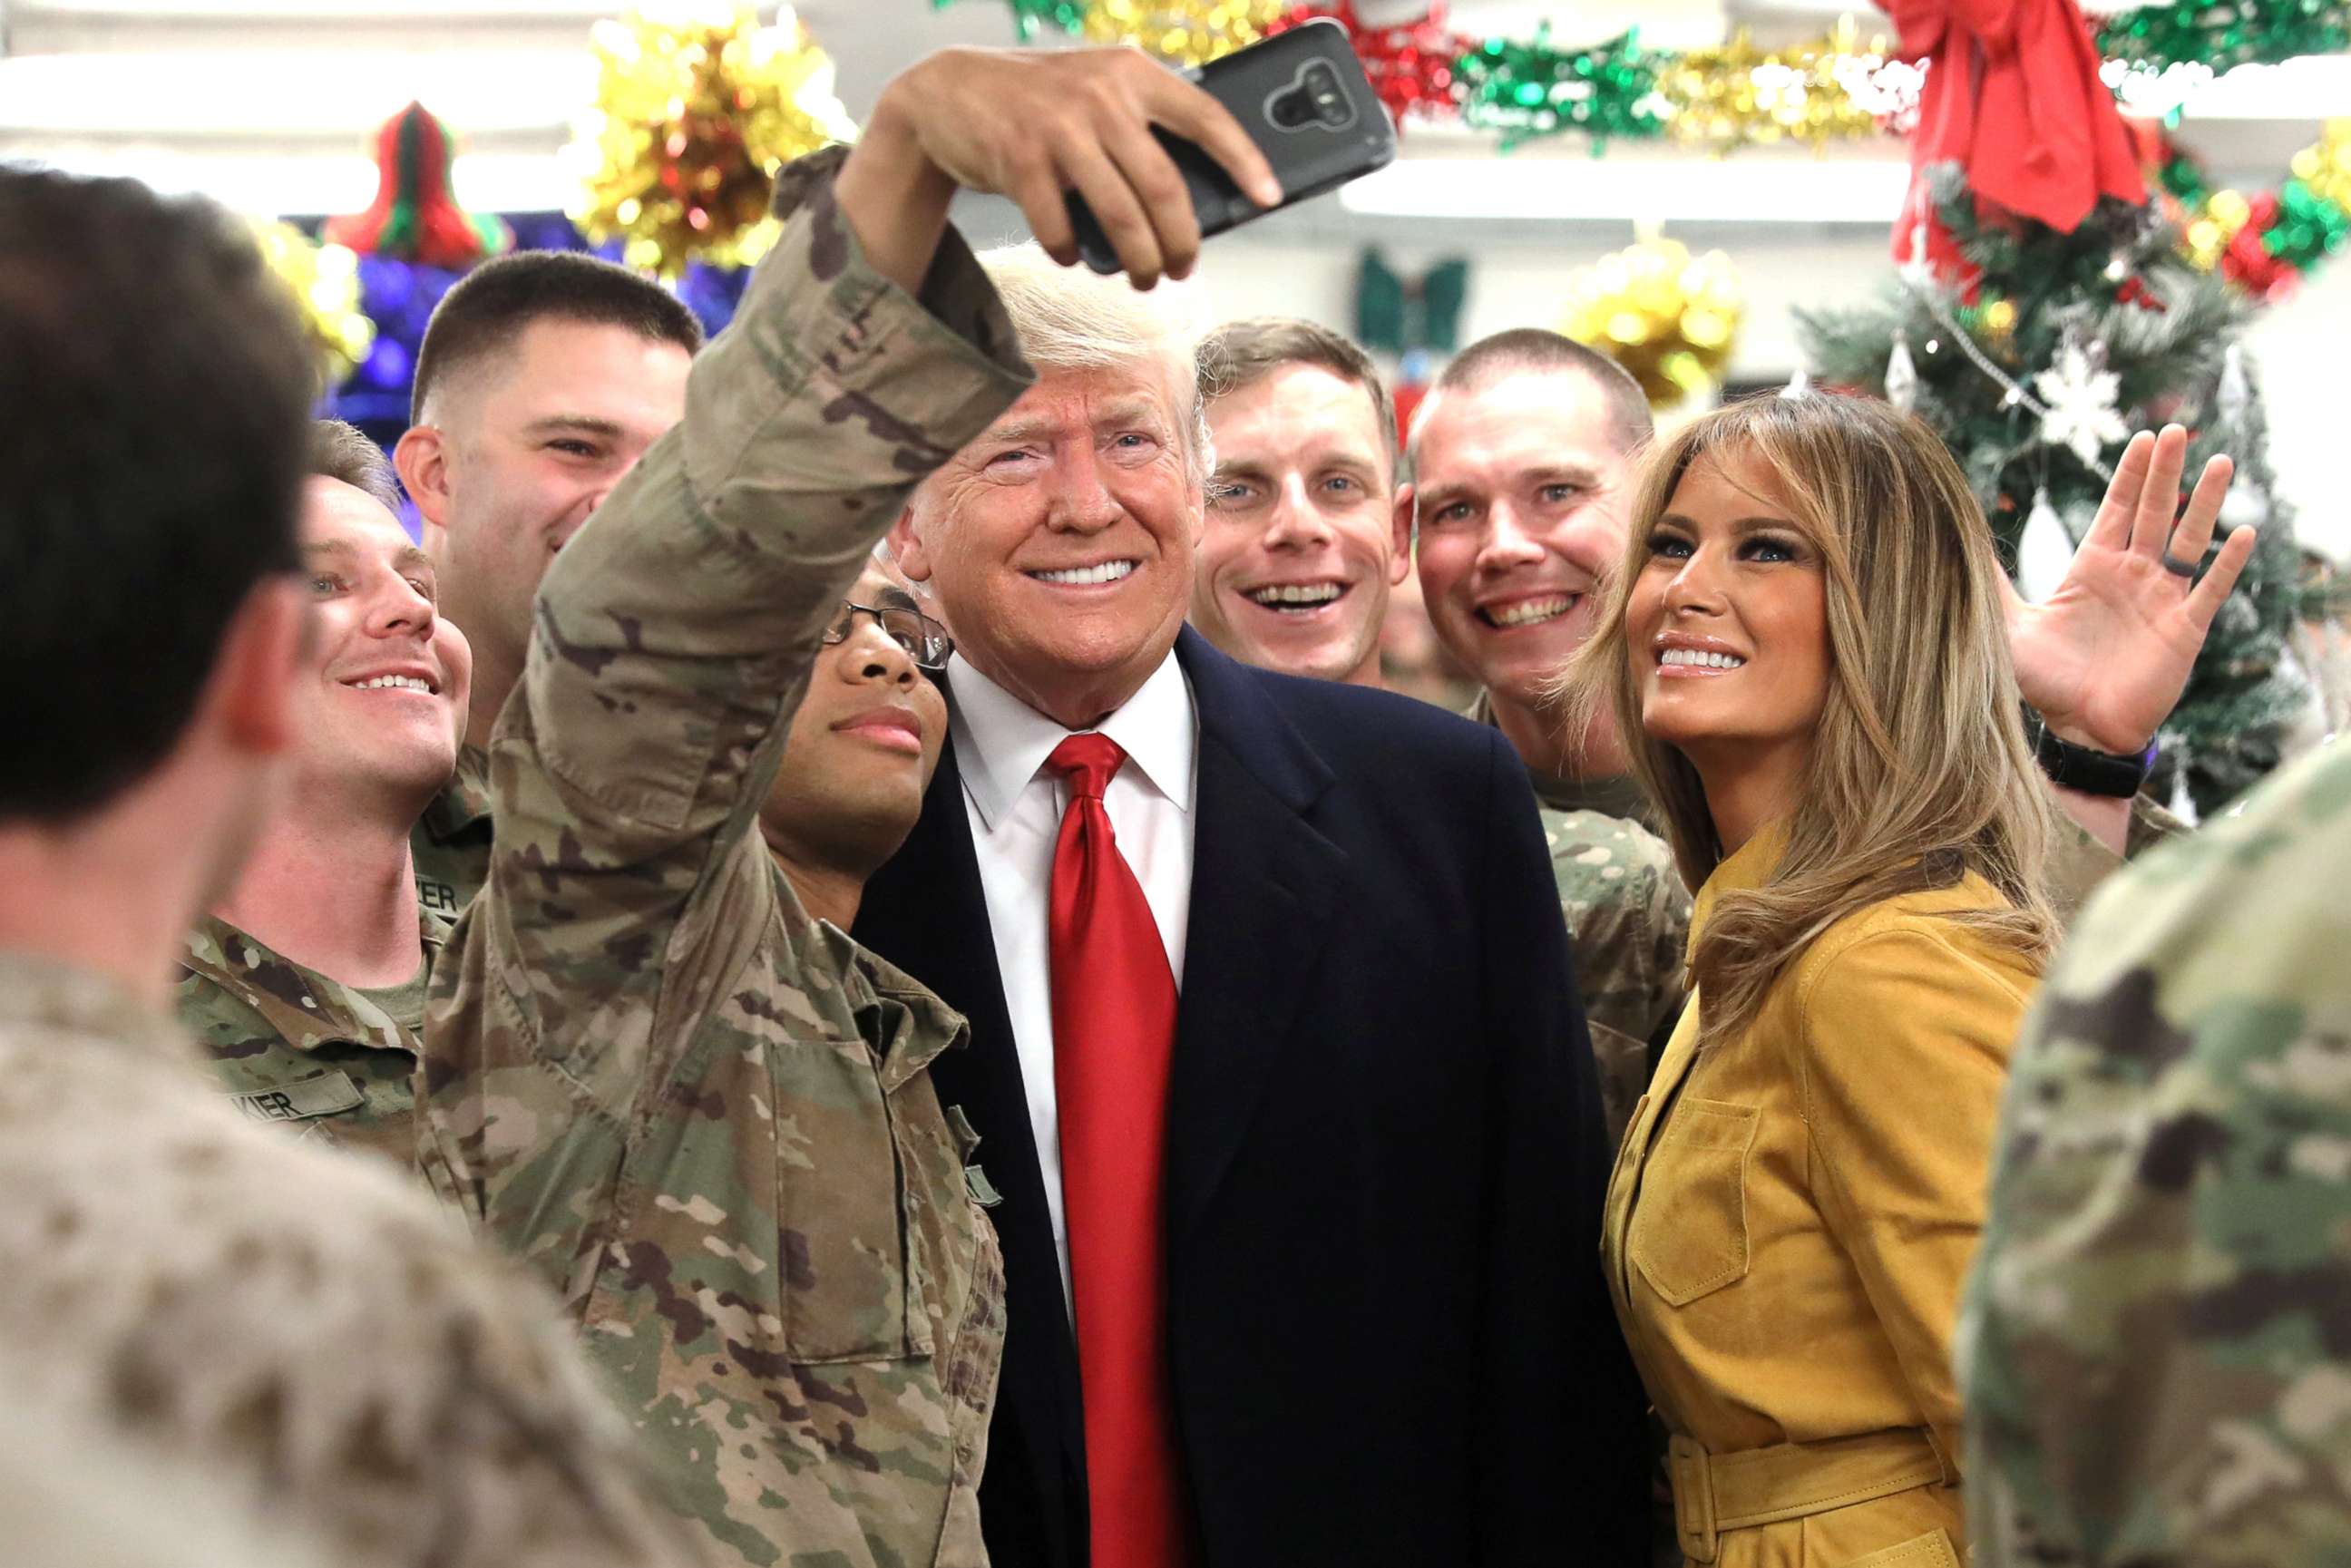 PHOTO: President Donald Trump and First Lady Melania Trump greet military personnel at the dining facility during an unannounced visit to Al Asad Air Base, Iraq, Dec. 26, 2018.